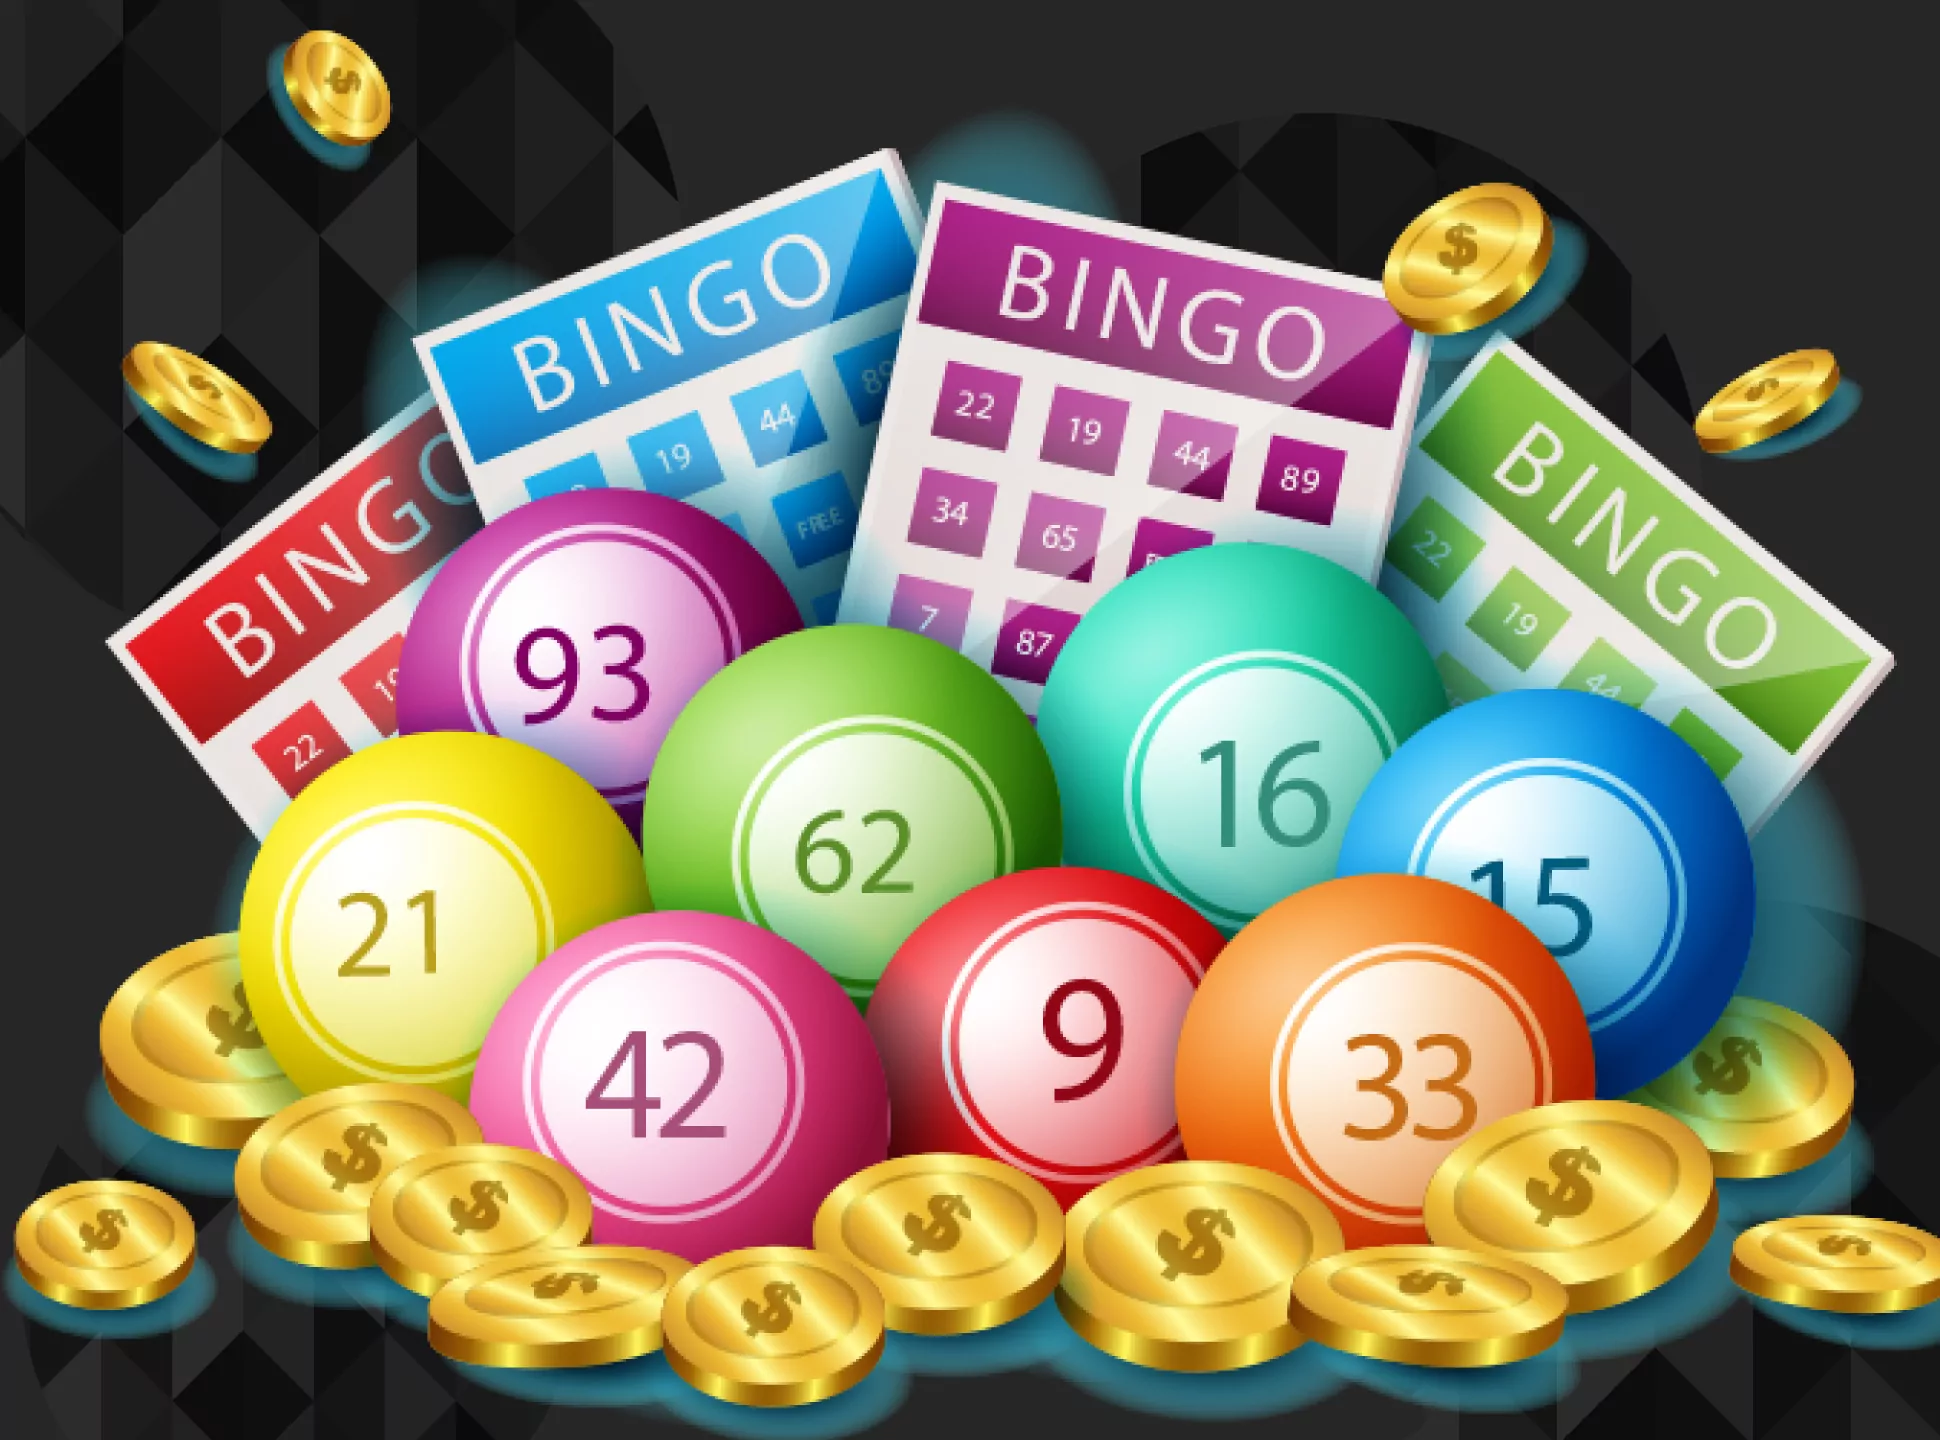 Test your luck and play online lotteries.